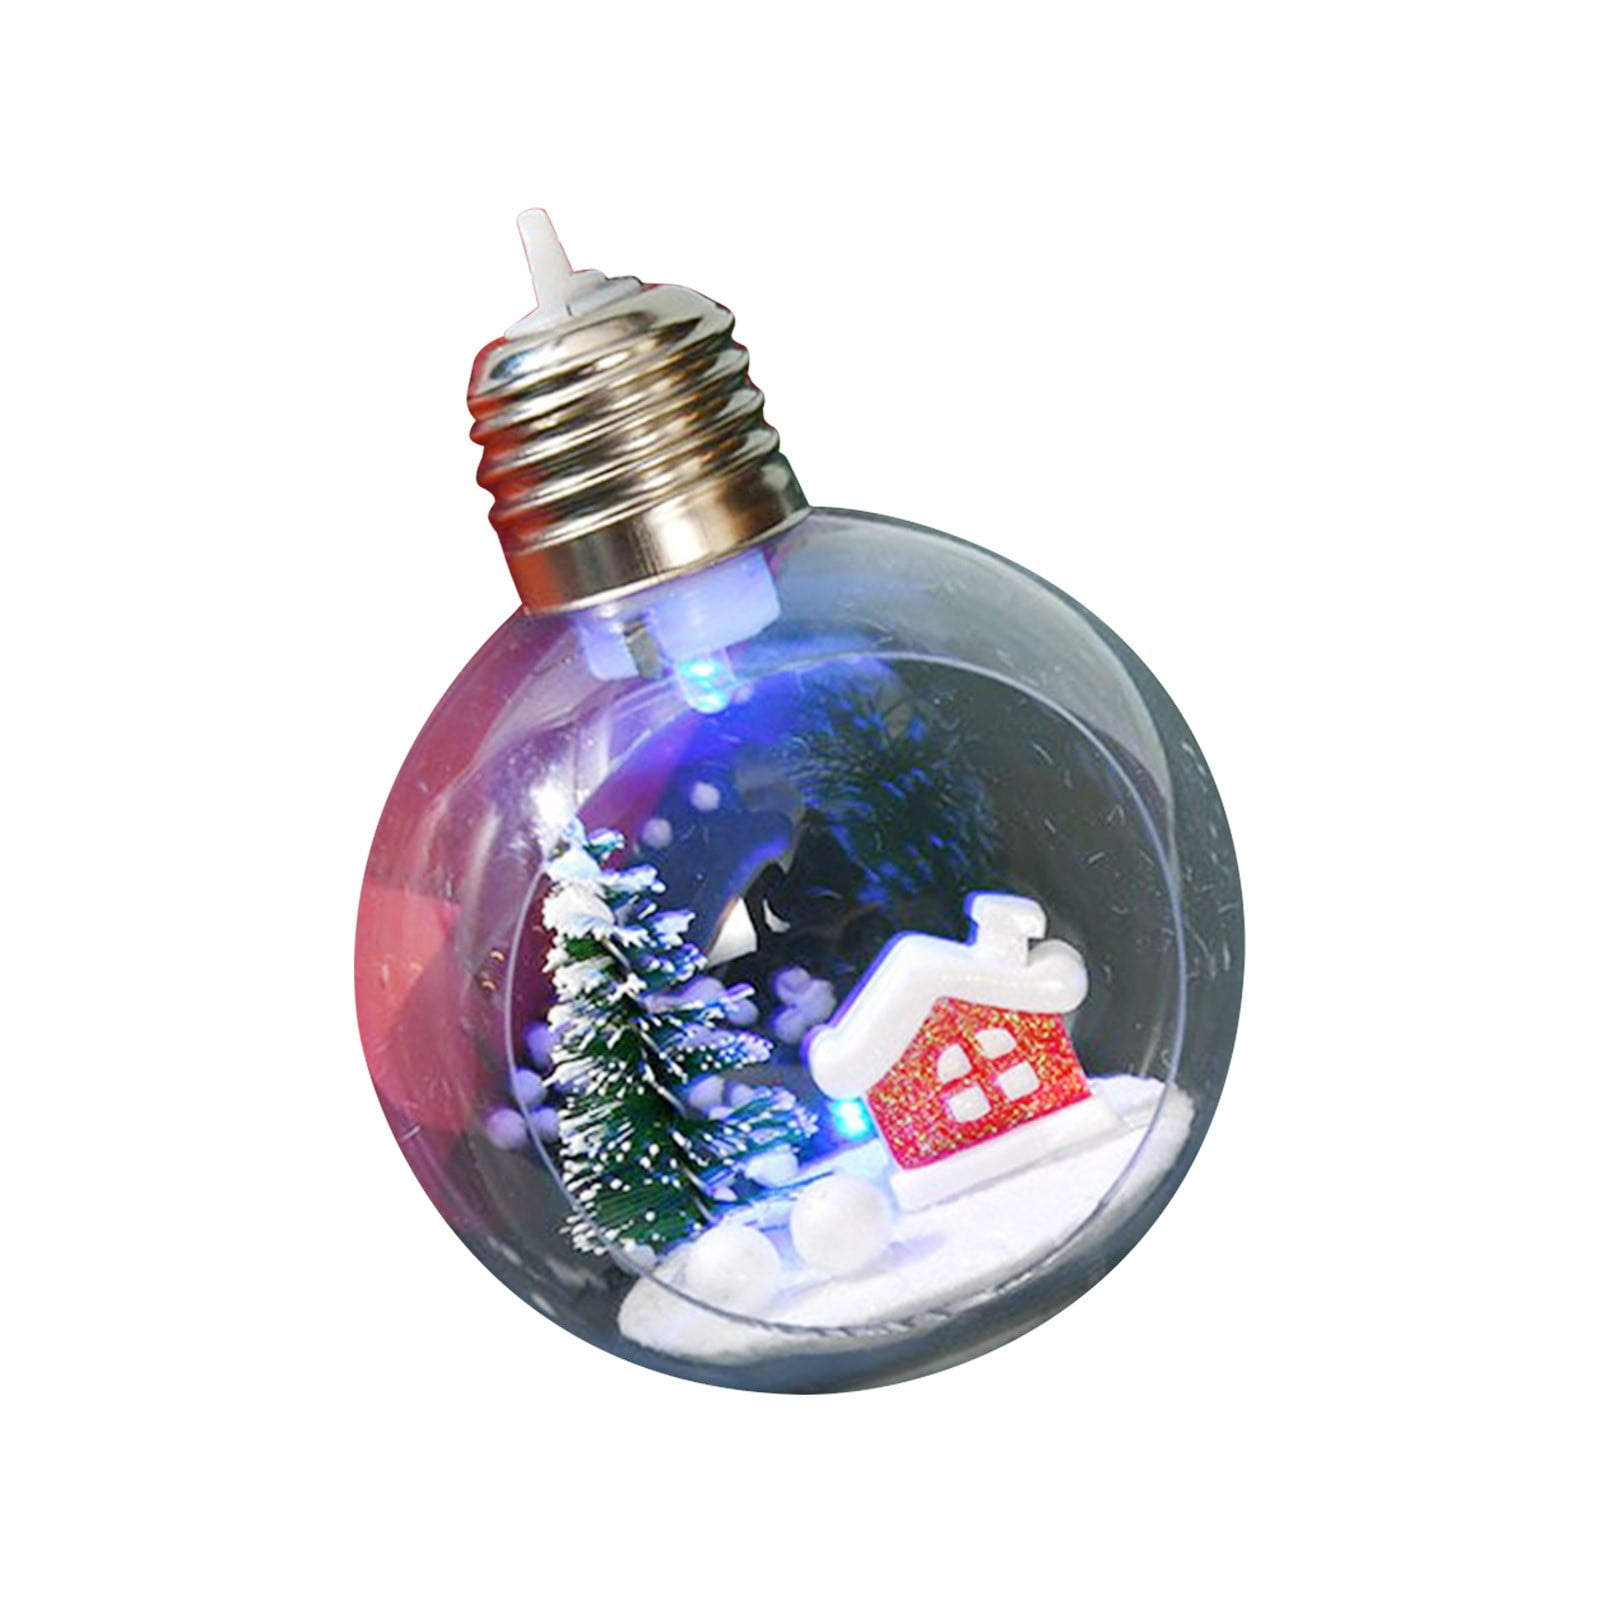 4 LED Christmas Ball Ornament, Lighted Hanging Plastic Ball Ornaments for  Christmas Tree, Light Up Christmas Ornaments for Holiday Decoration, Xmas  Tree Pendant Ornaments 